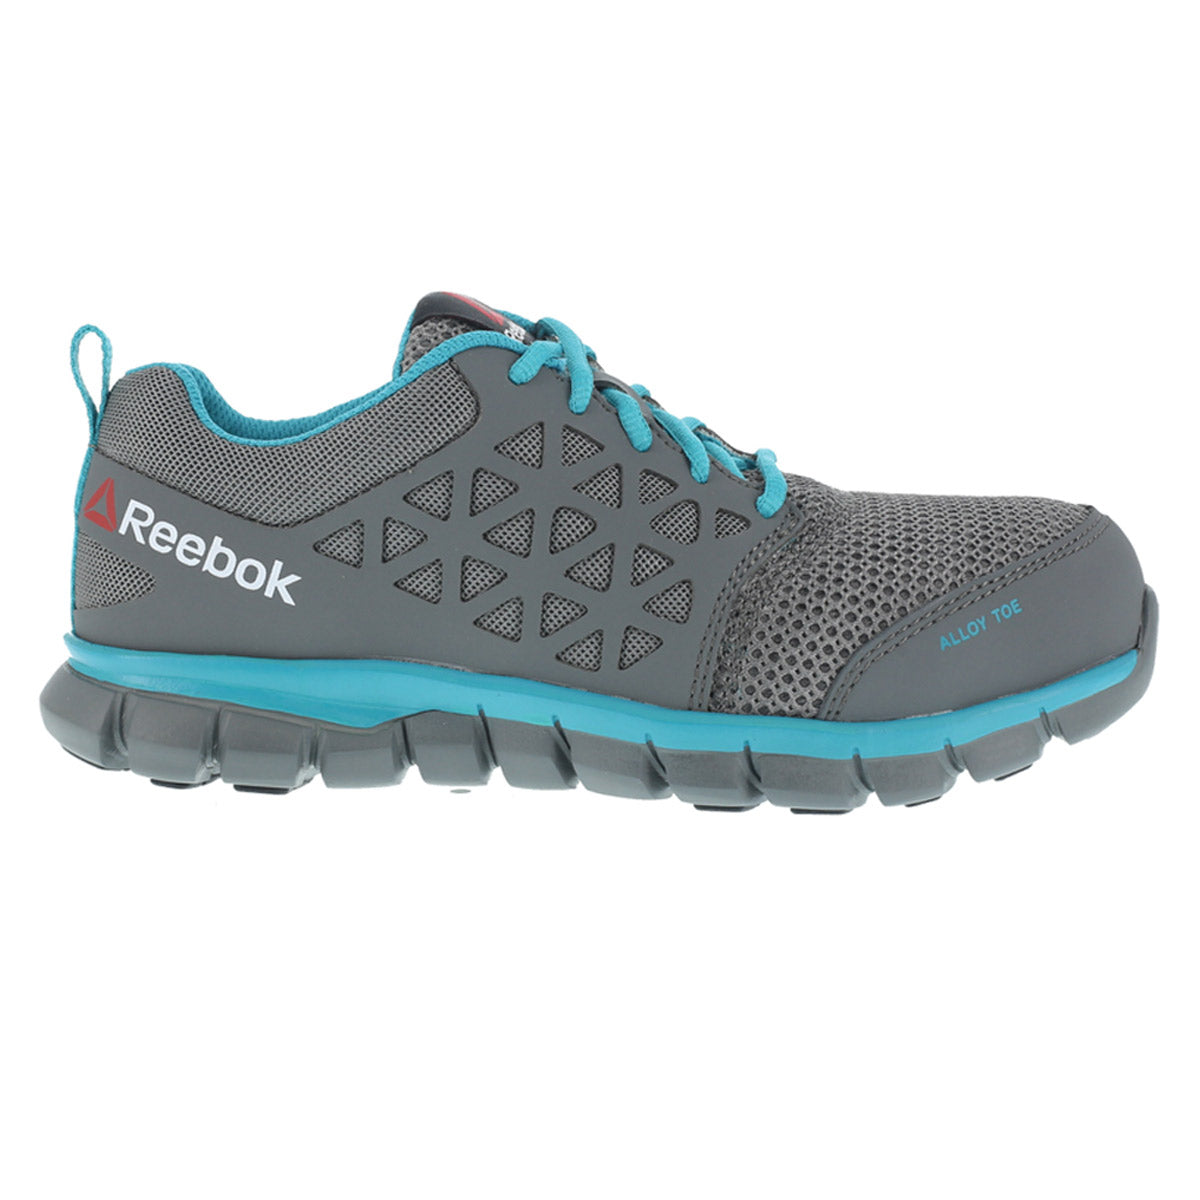 Gray Reebok Work RB045 steel toe running shoe with teal accents, a zigzag sole design, and a slip-resistant outsole.